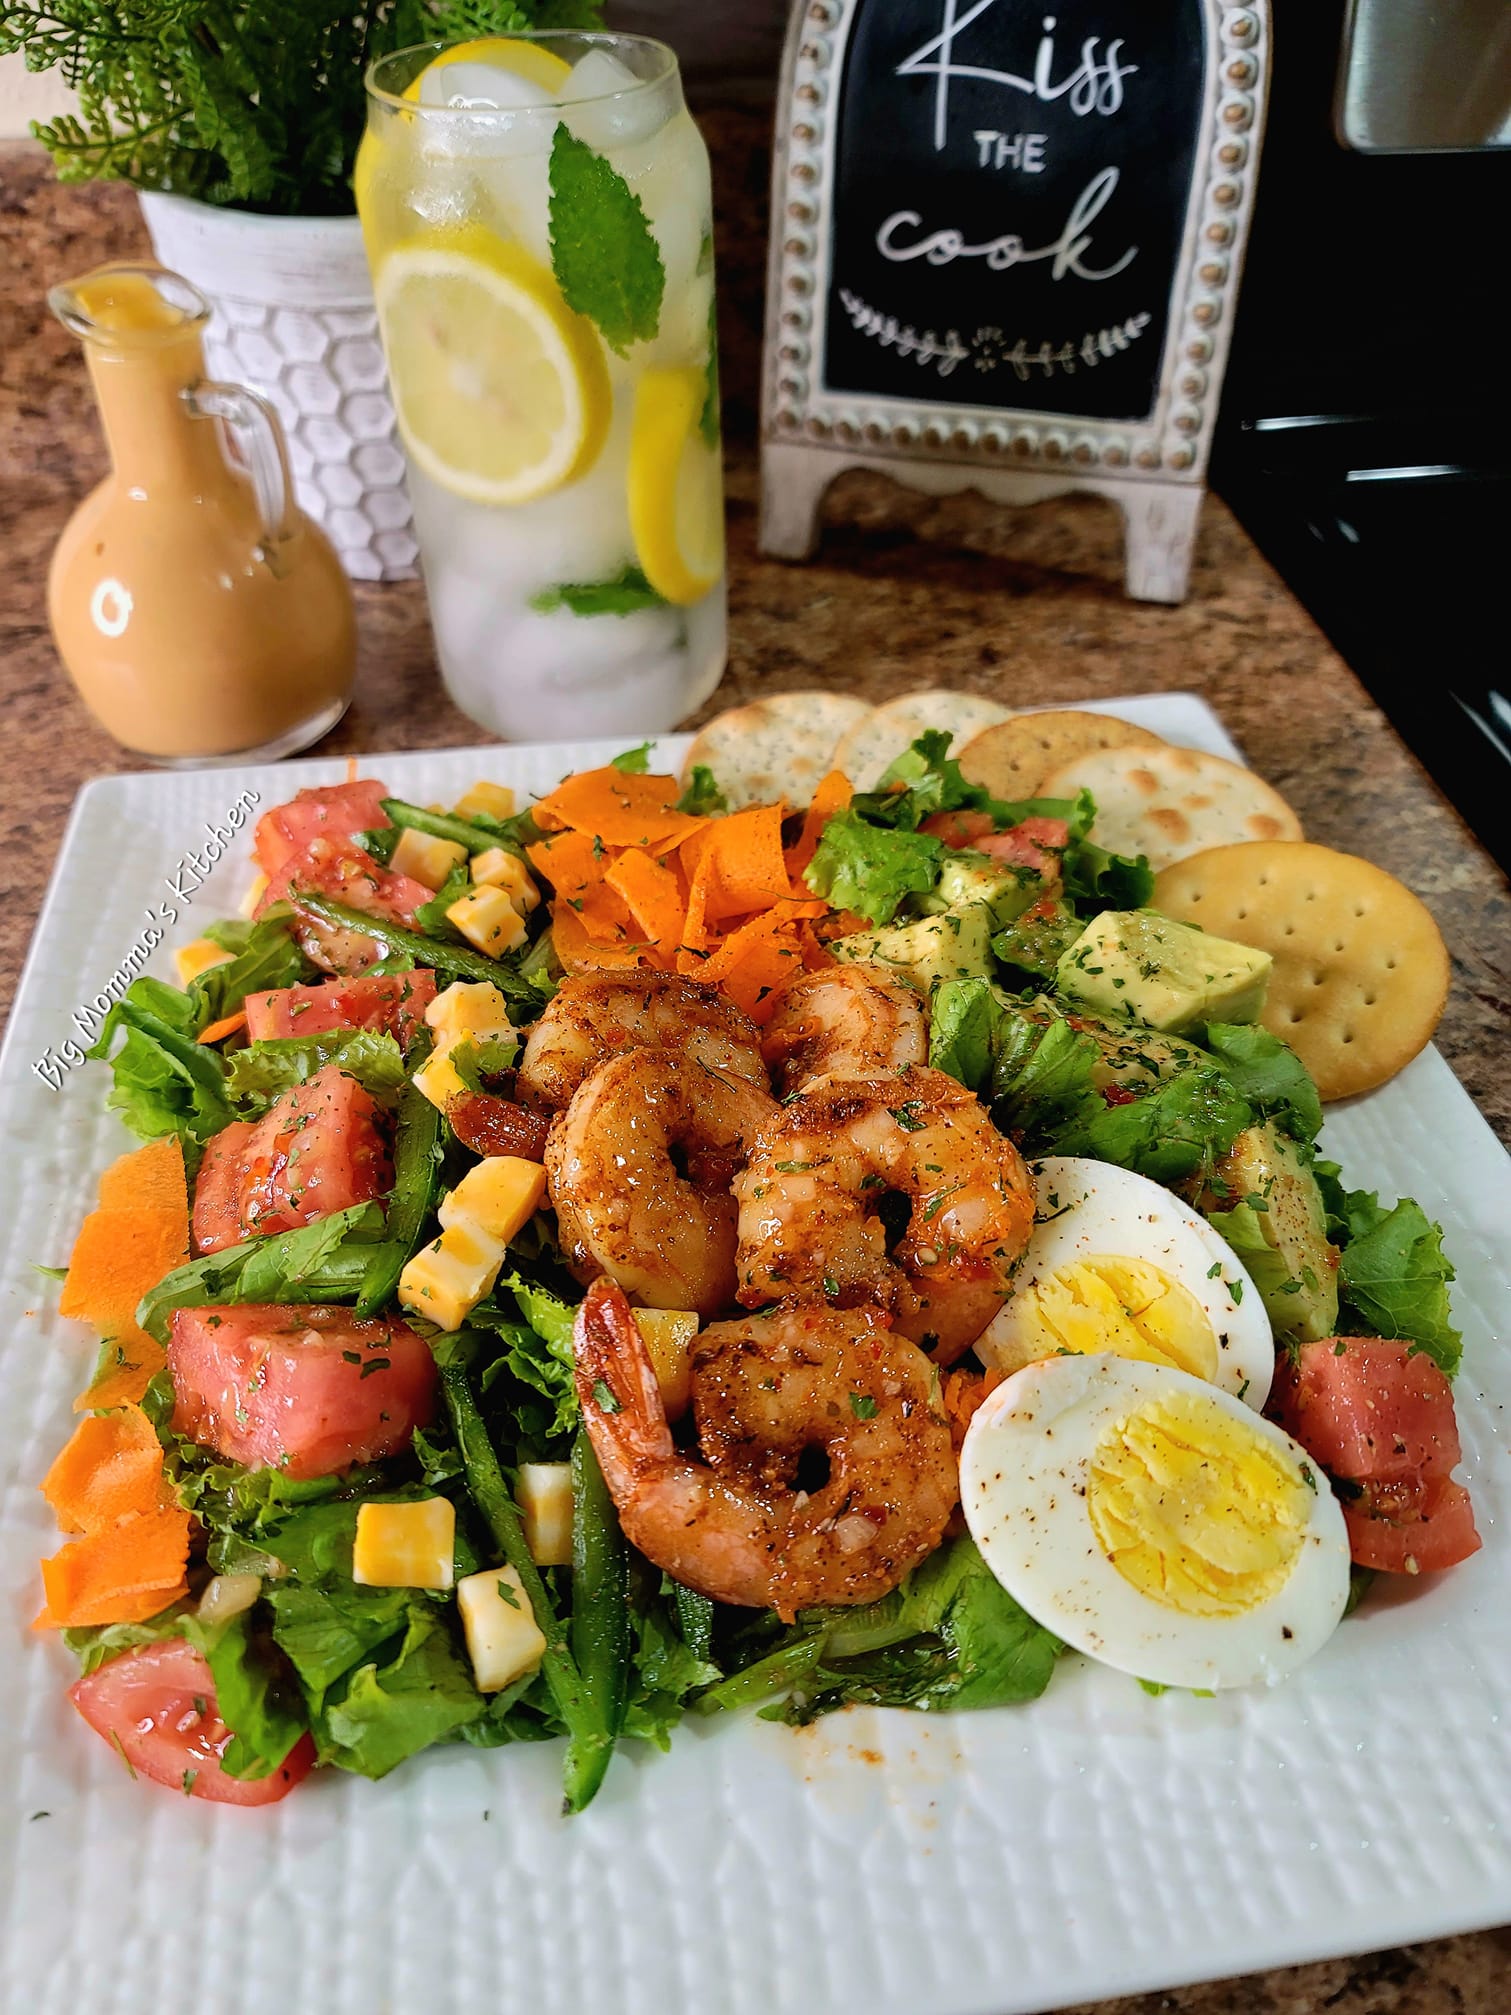 This grilled shrimp and avocado salad is a tasty and satisfying way to get your protein and vegetables.